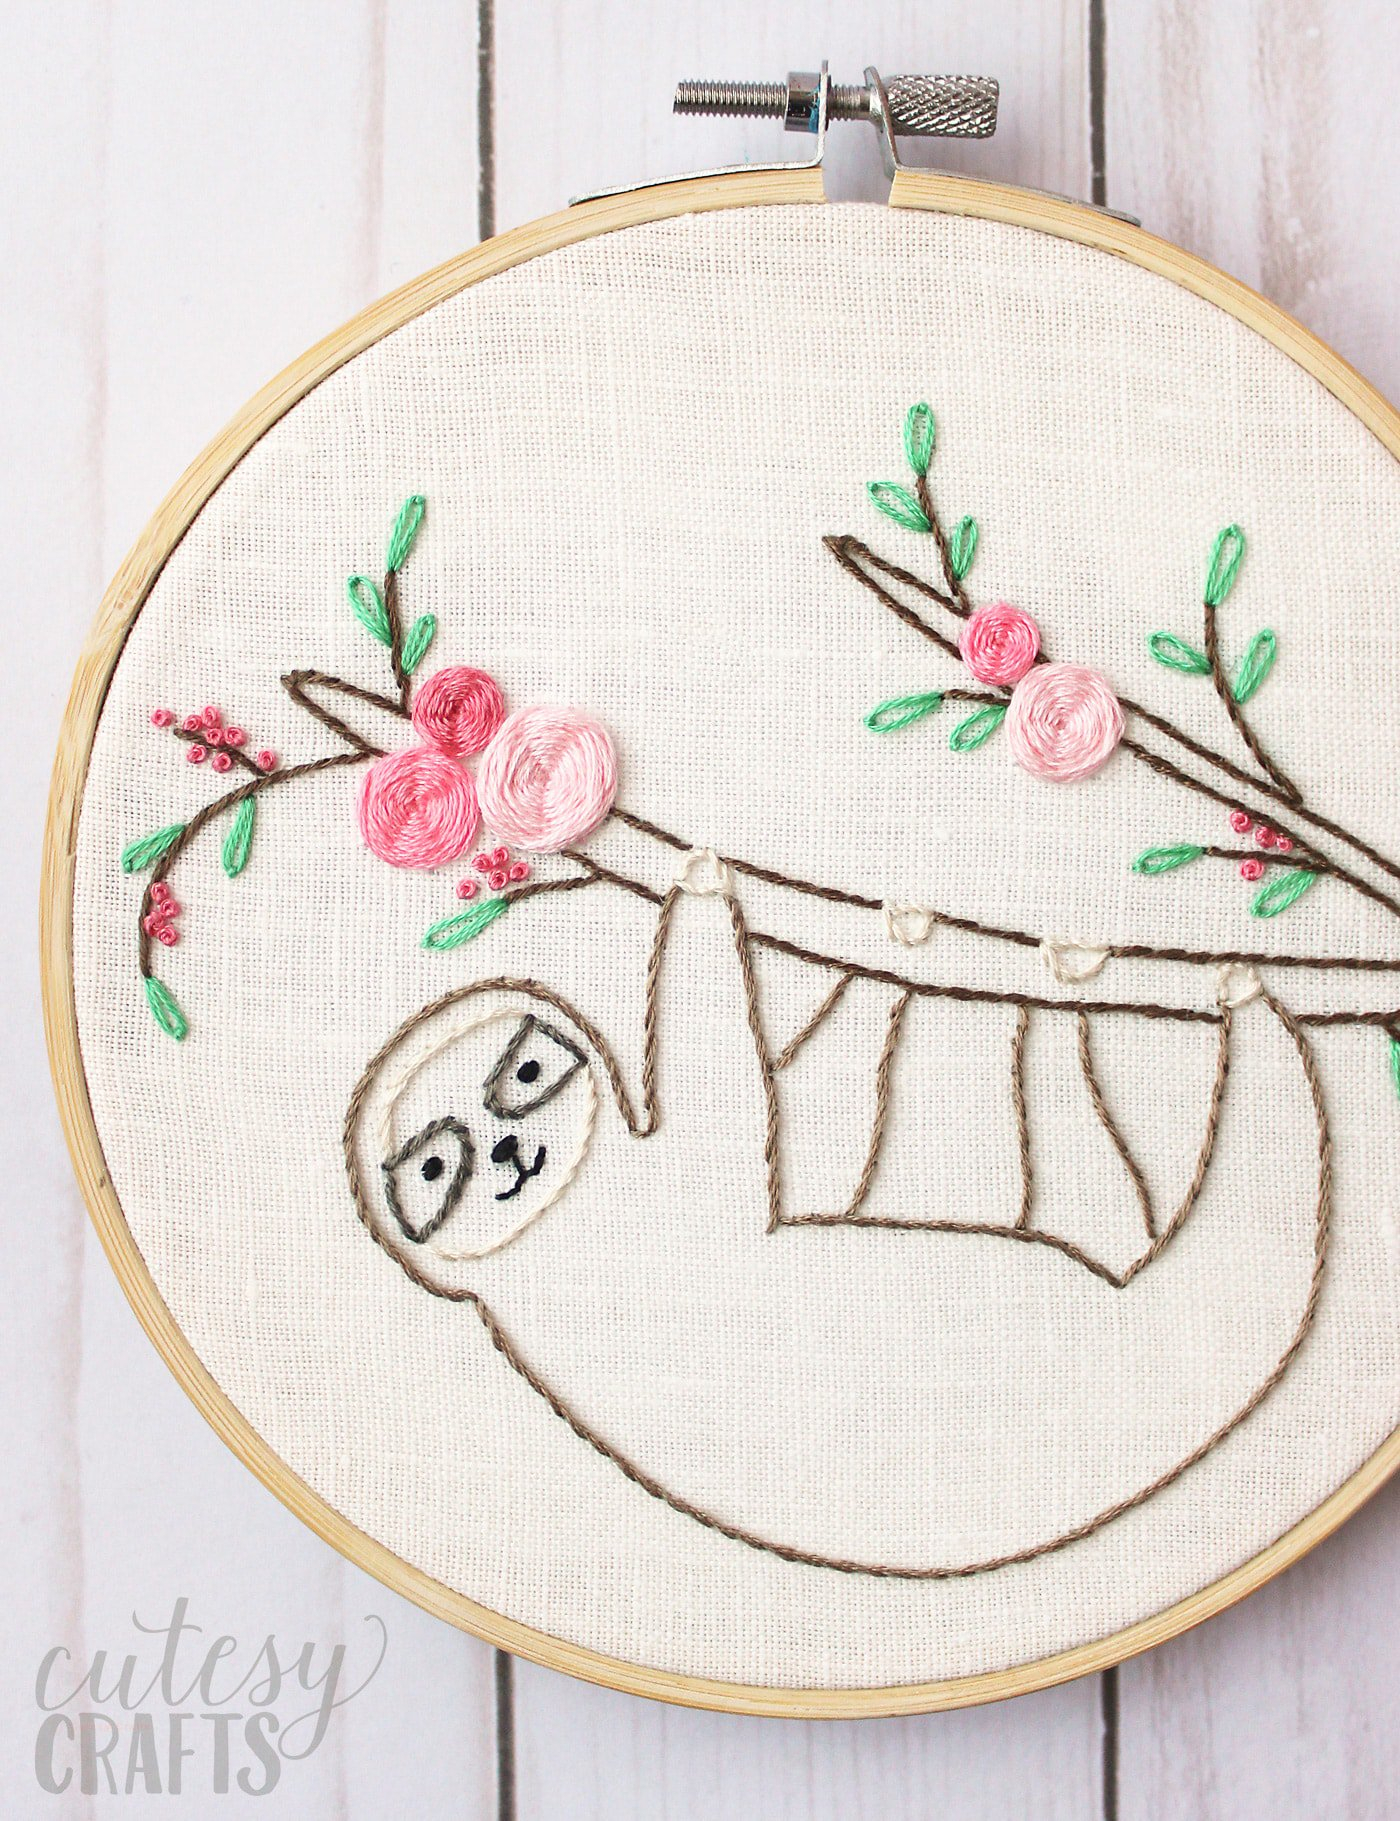 Free Paper Embroidery Patterns And Instructions Adorable Sloth Hand Embroidery Pattern The Polka Dot Chair